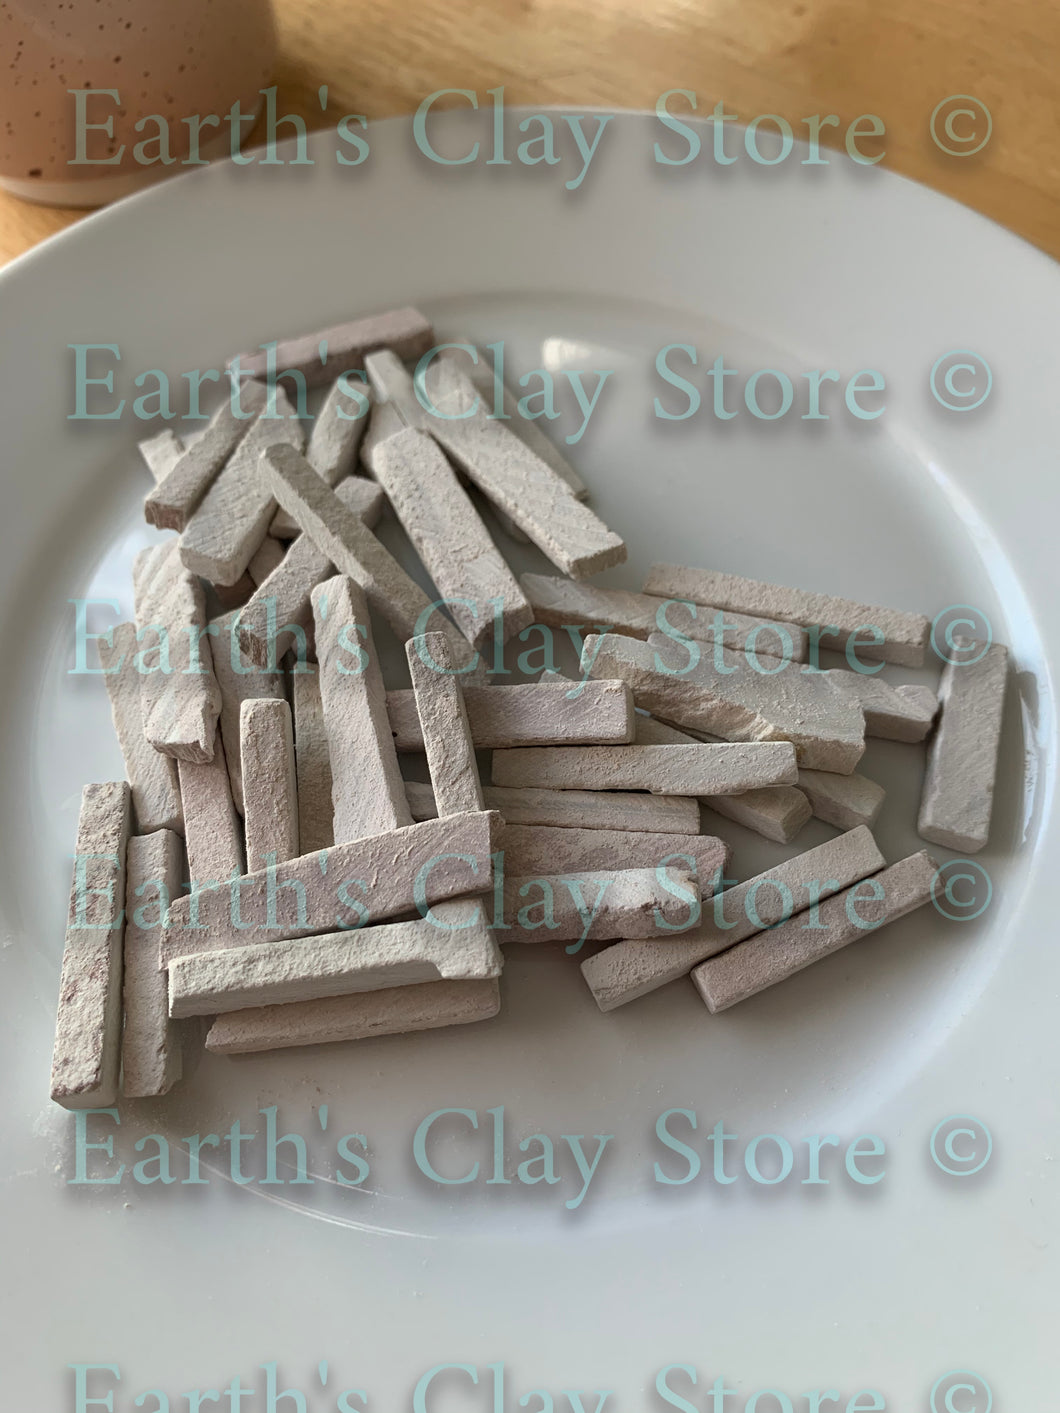 Slate Pencils – Tagged Edible – Earth's Clay Store